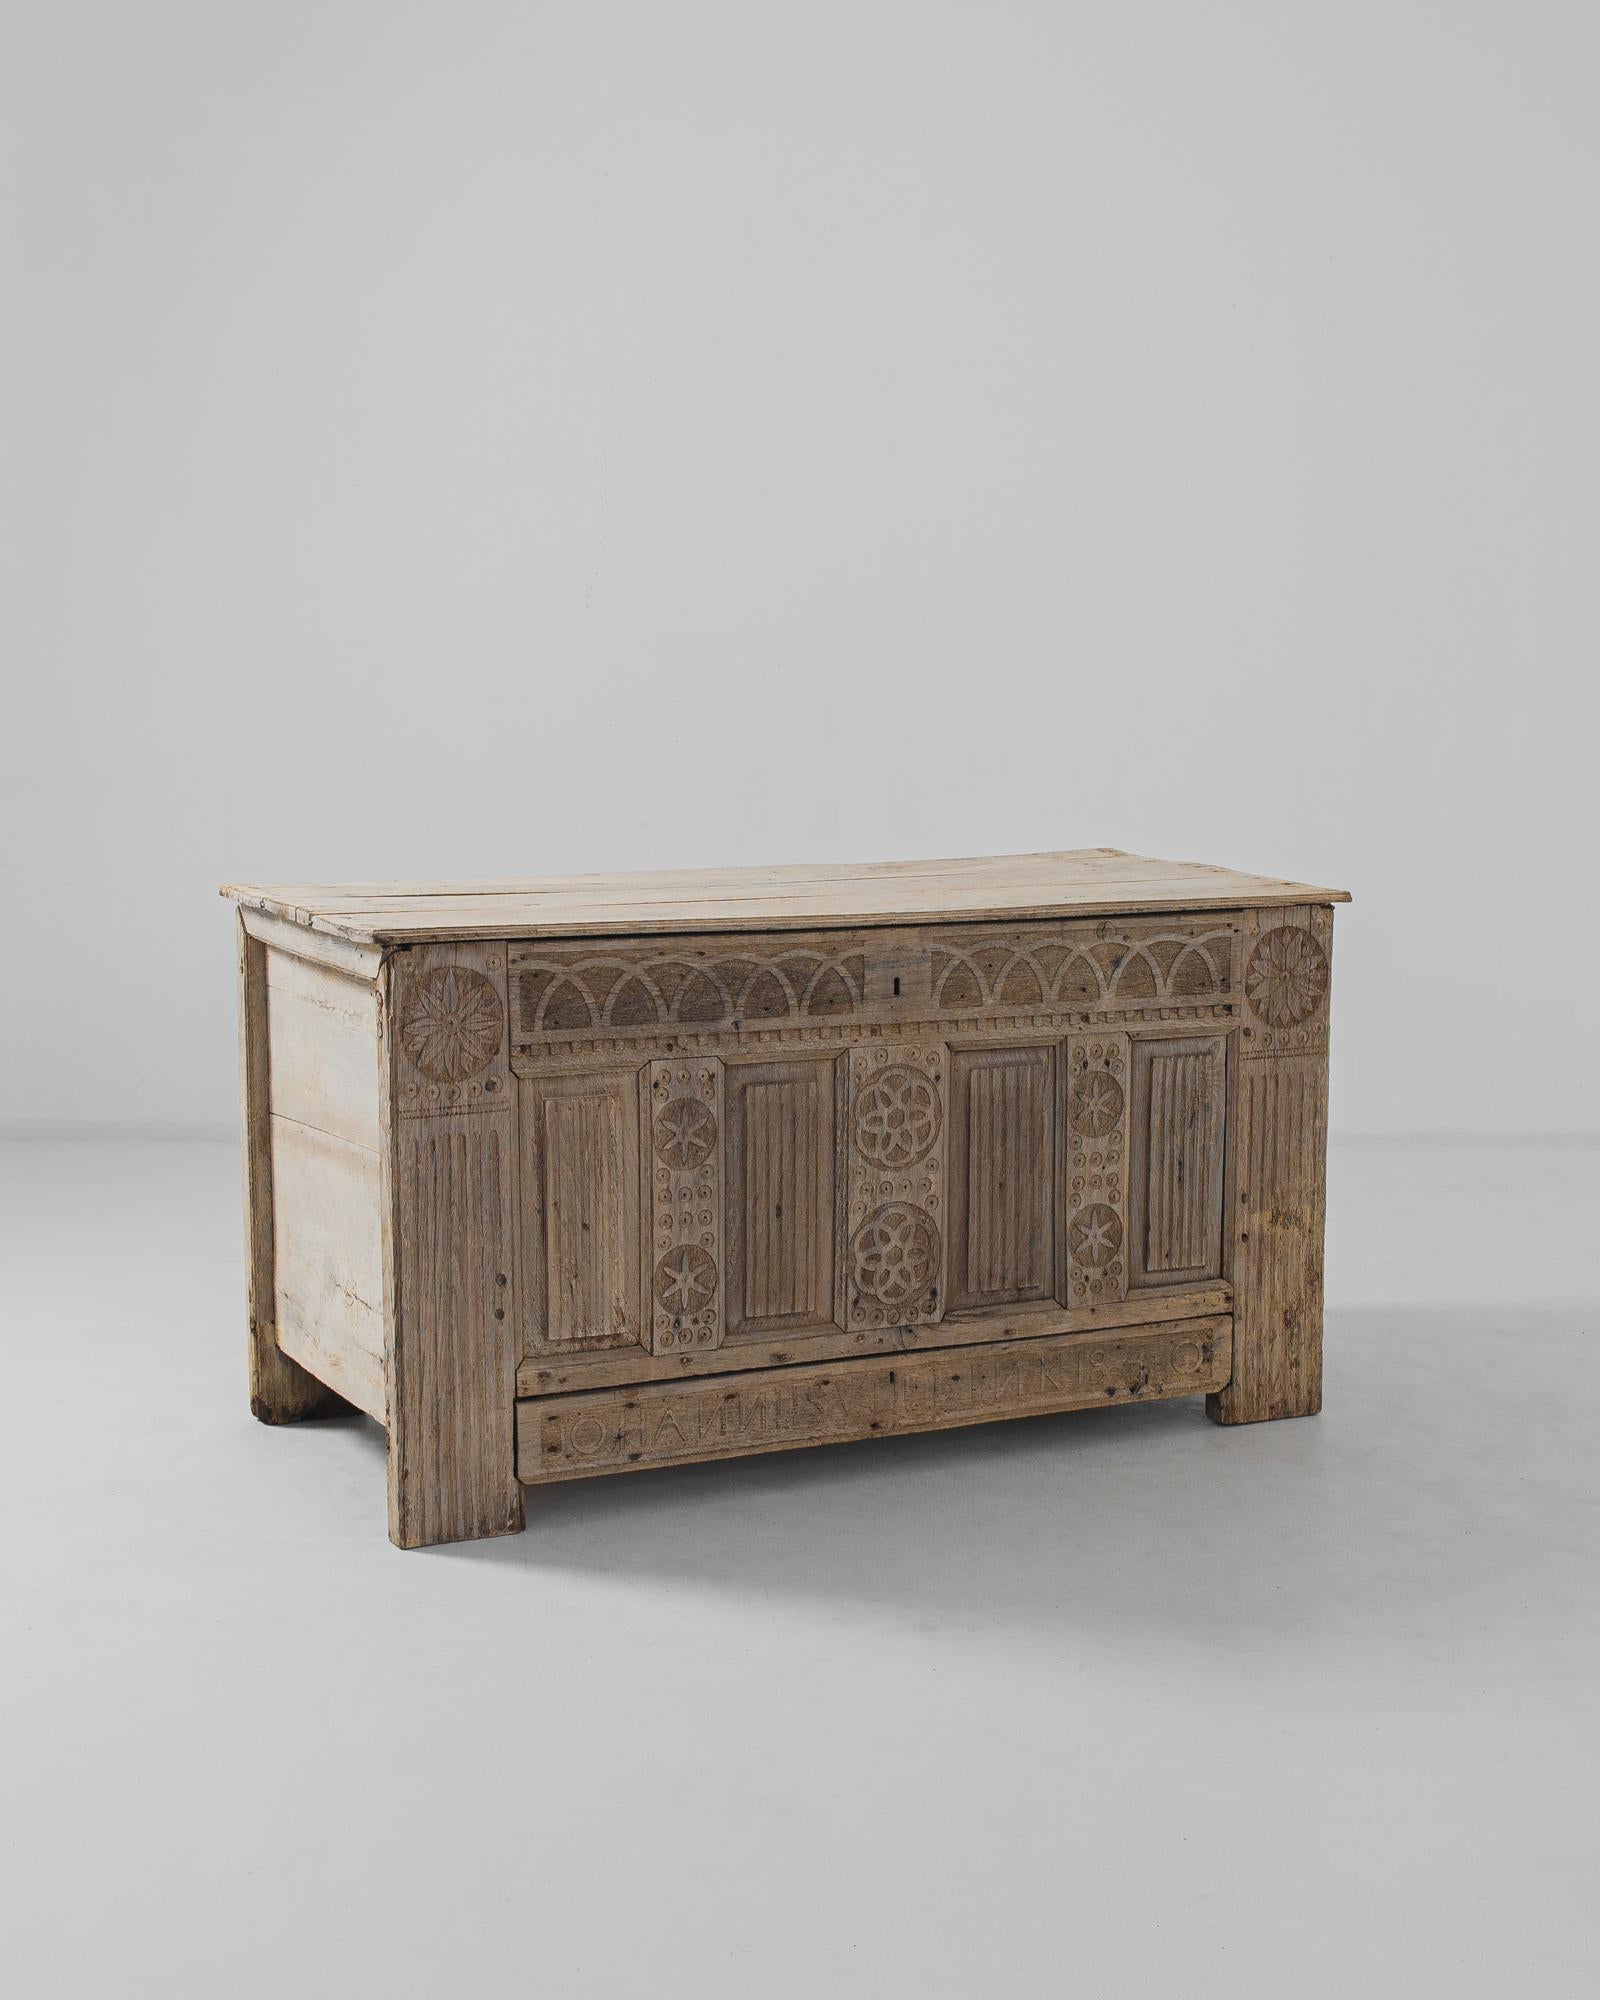 A carved oak trunk from 1820s France. Carved arches, stars and rosettes echo the forms of gothic tracery, lending the sandy wood a Gothic Revival aesthetic. A long drawer below the central chest is carved with the name of the original owner and the